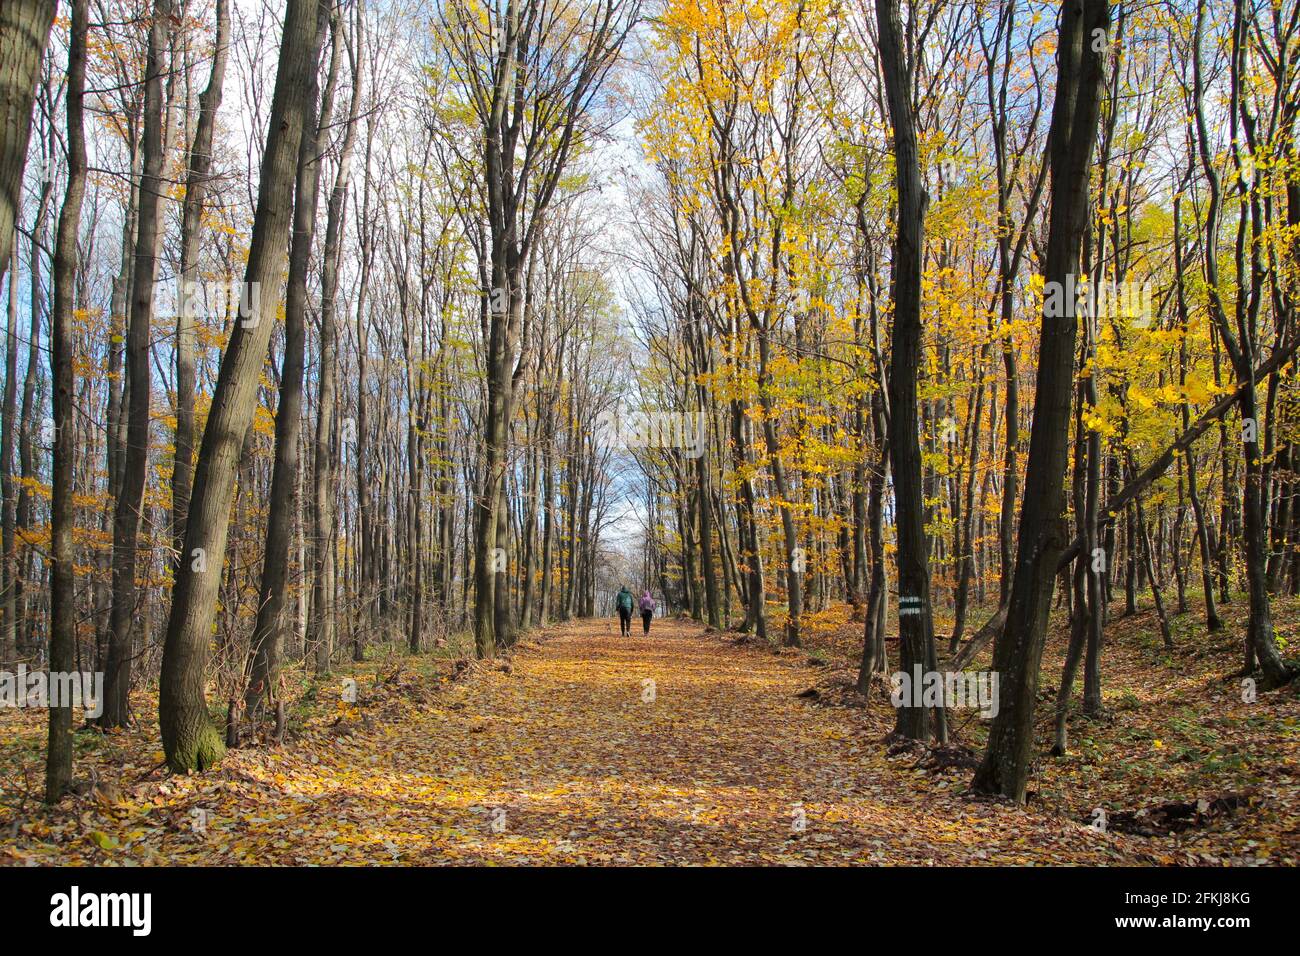 Two unrecognizable persons walking on a forest path on a nice autumn day Stock Photo